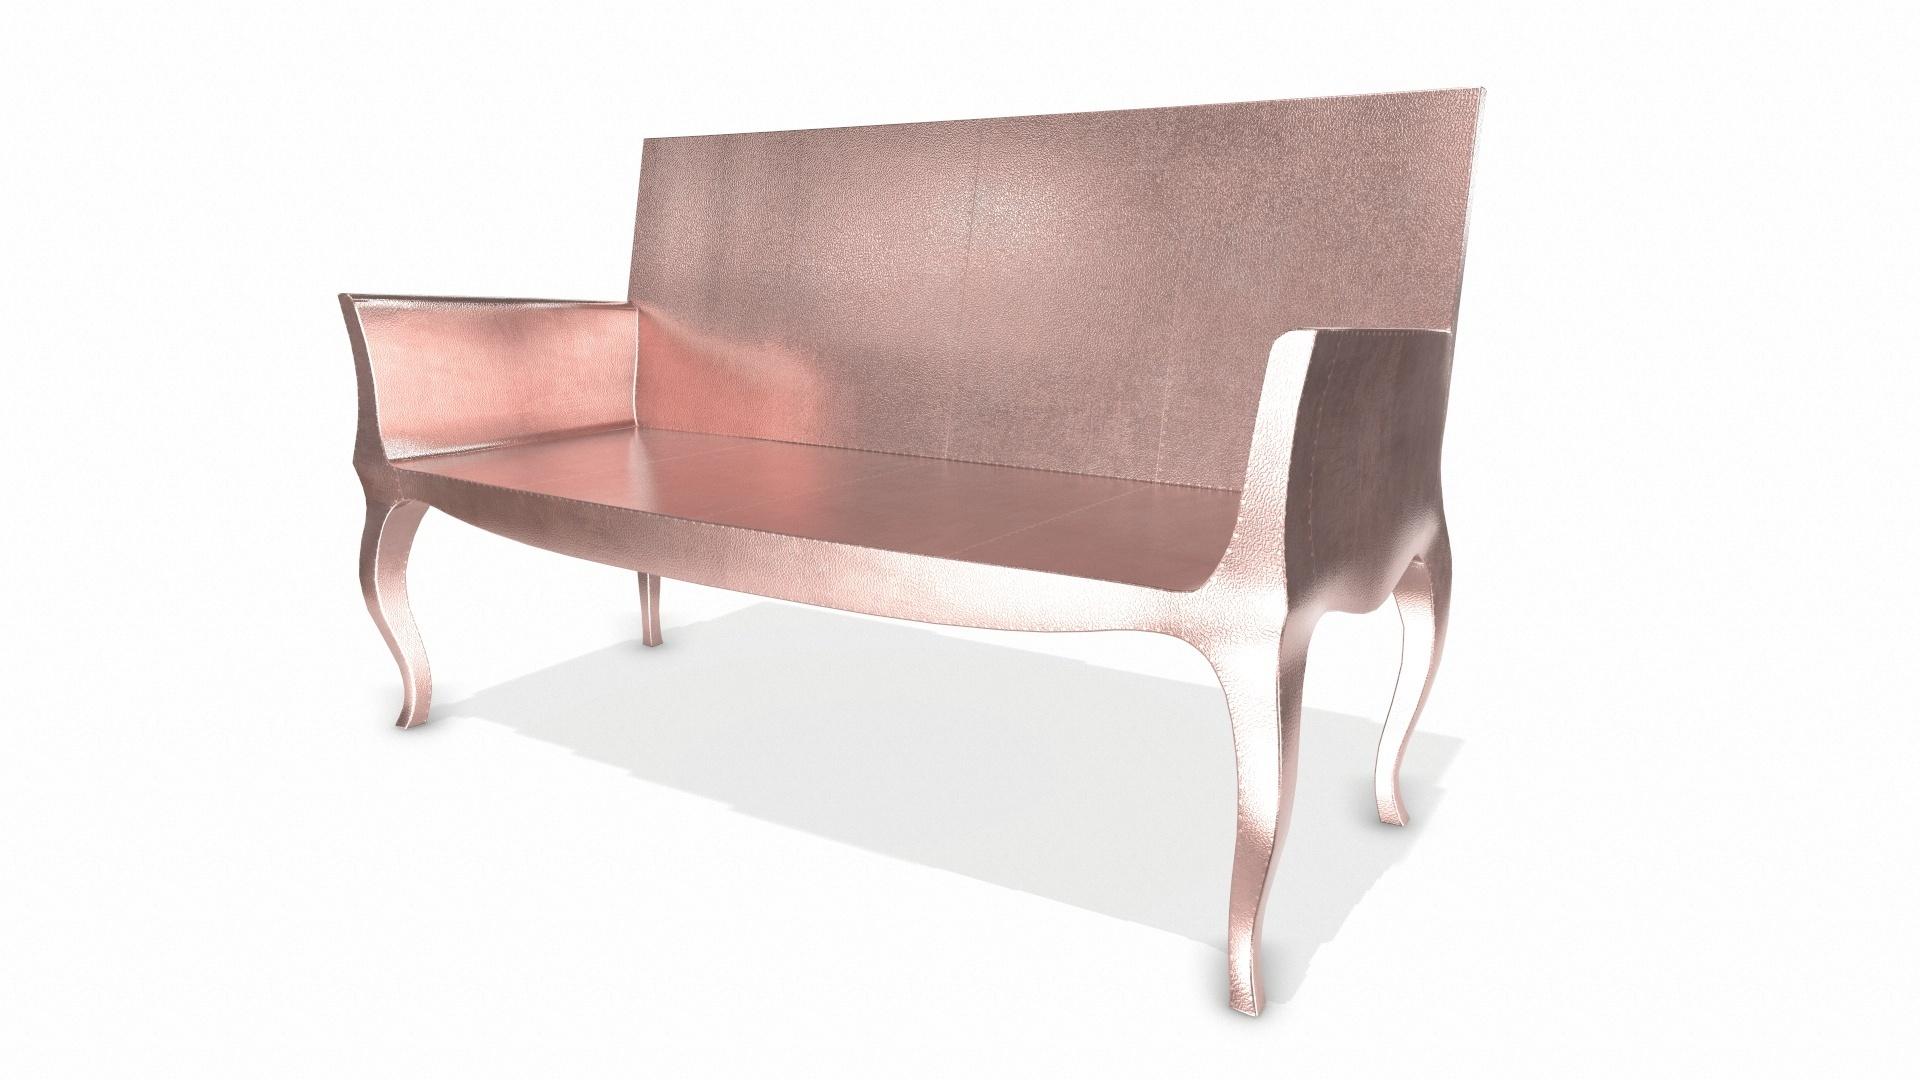 American Louise Settee Art Deco Living Room Sets in Fine Hammered Copper by Paul Mathieu For Sale